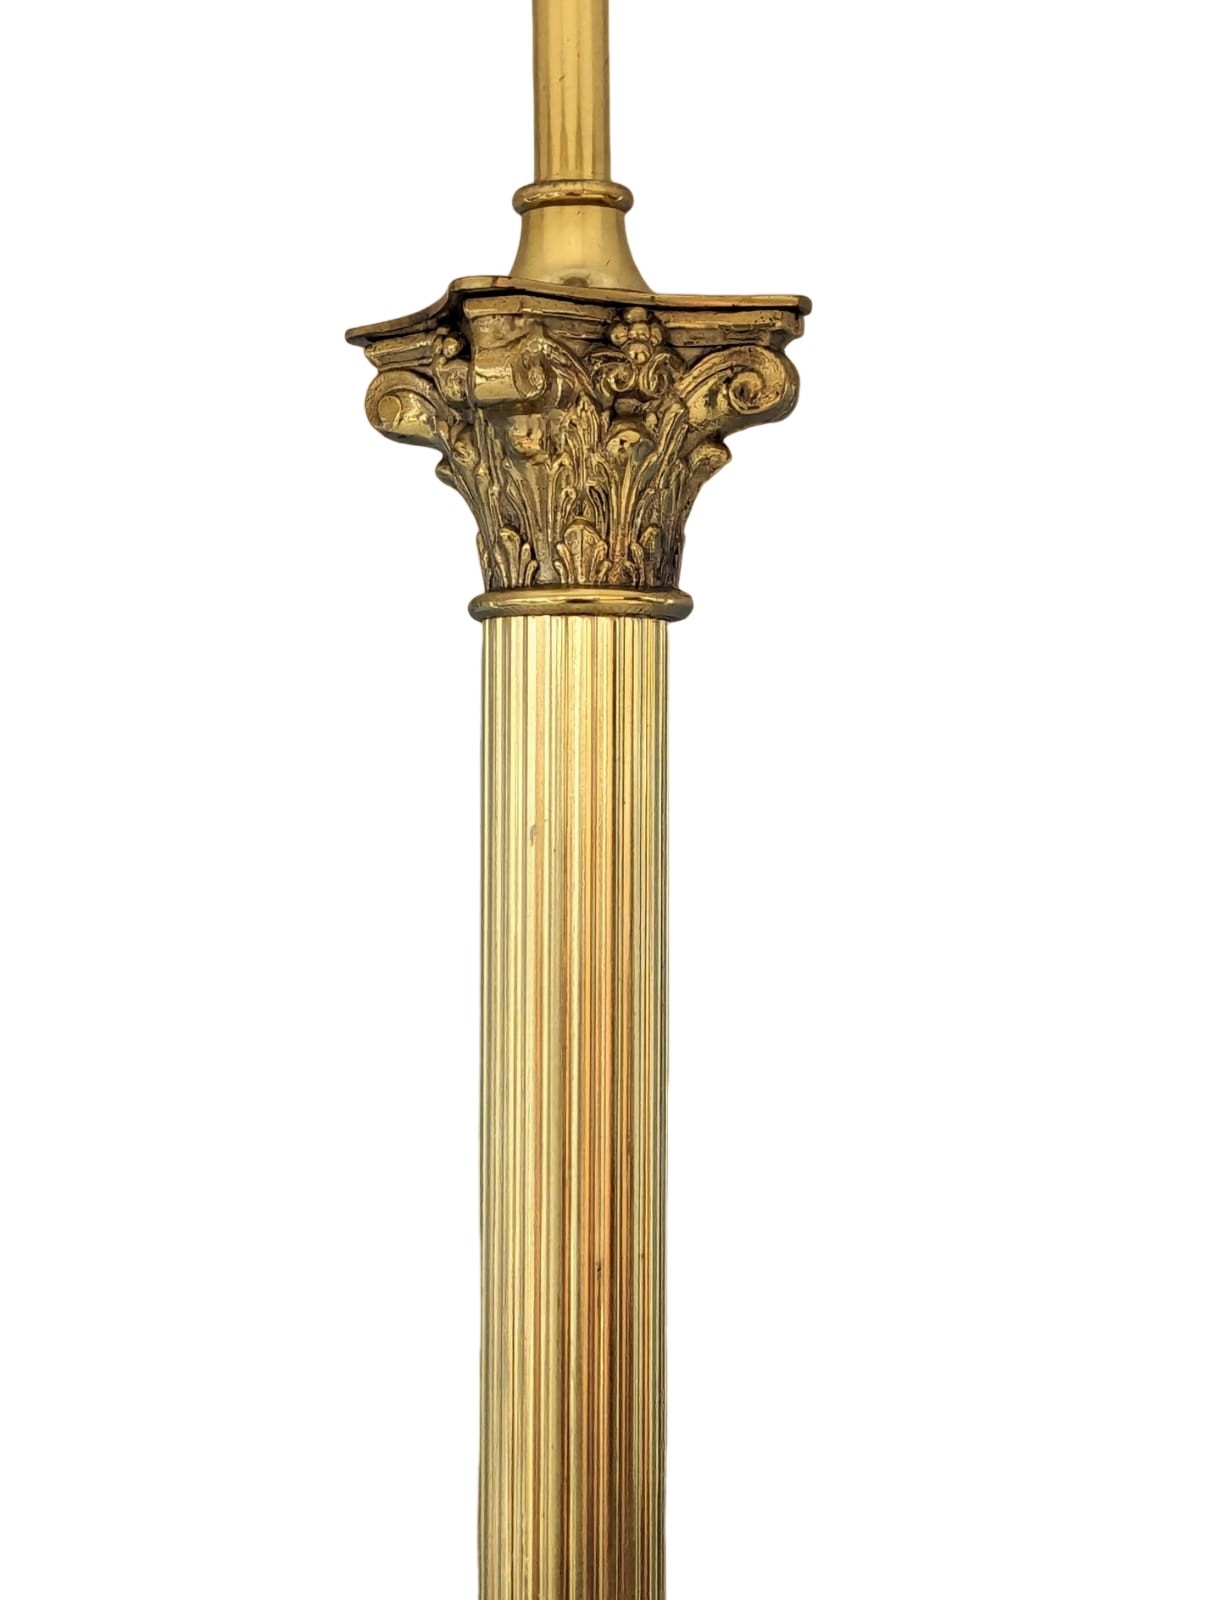 A vintage brass standard lamp with Corinthian column, 139cm without shade - Image 2 of 3